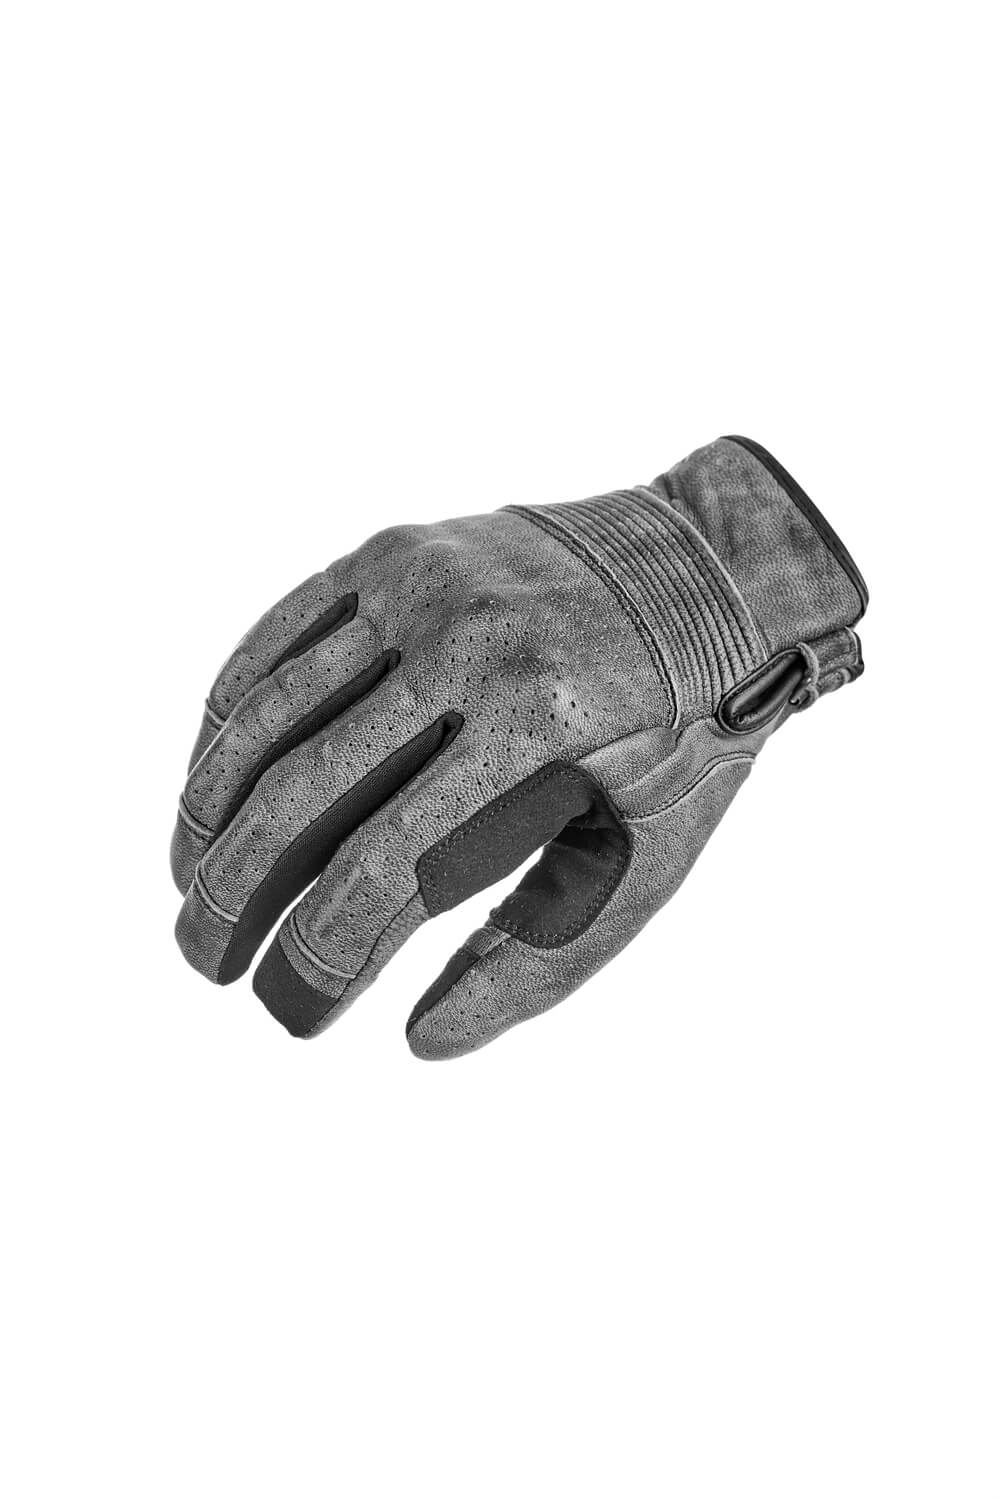 ONYX GREY - Leather Motorcycle Gloves 1